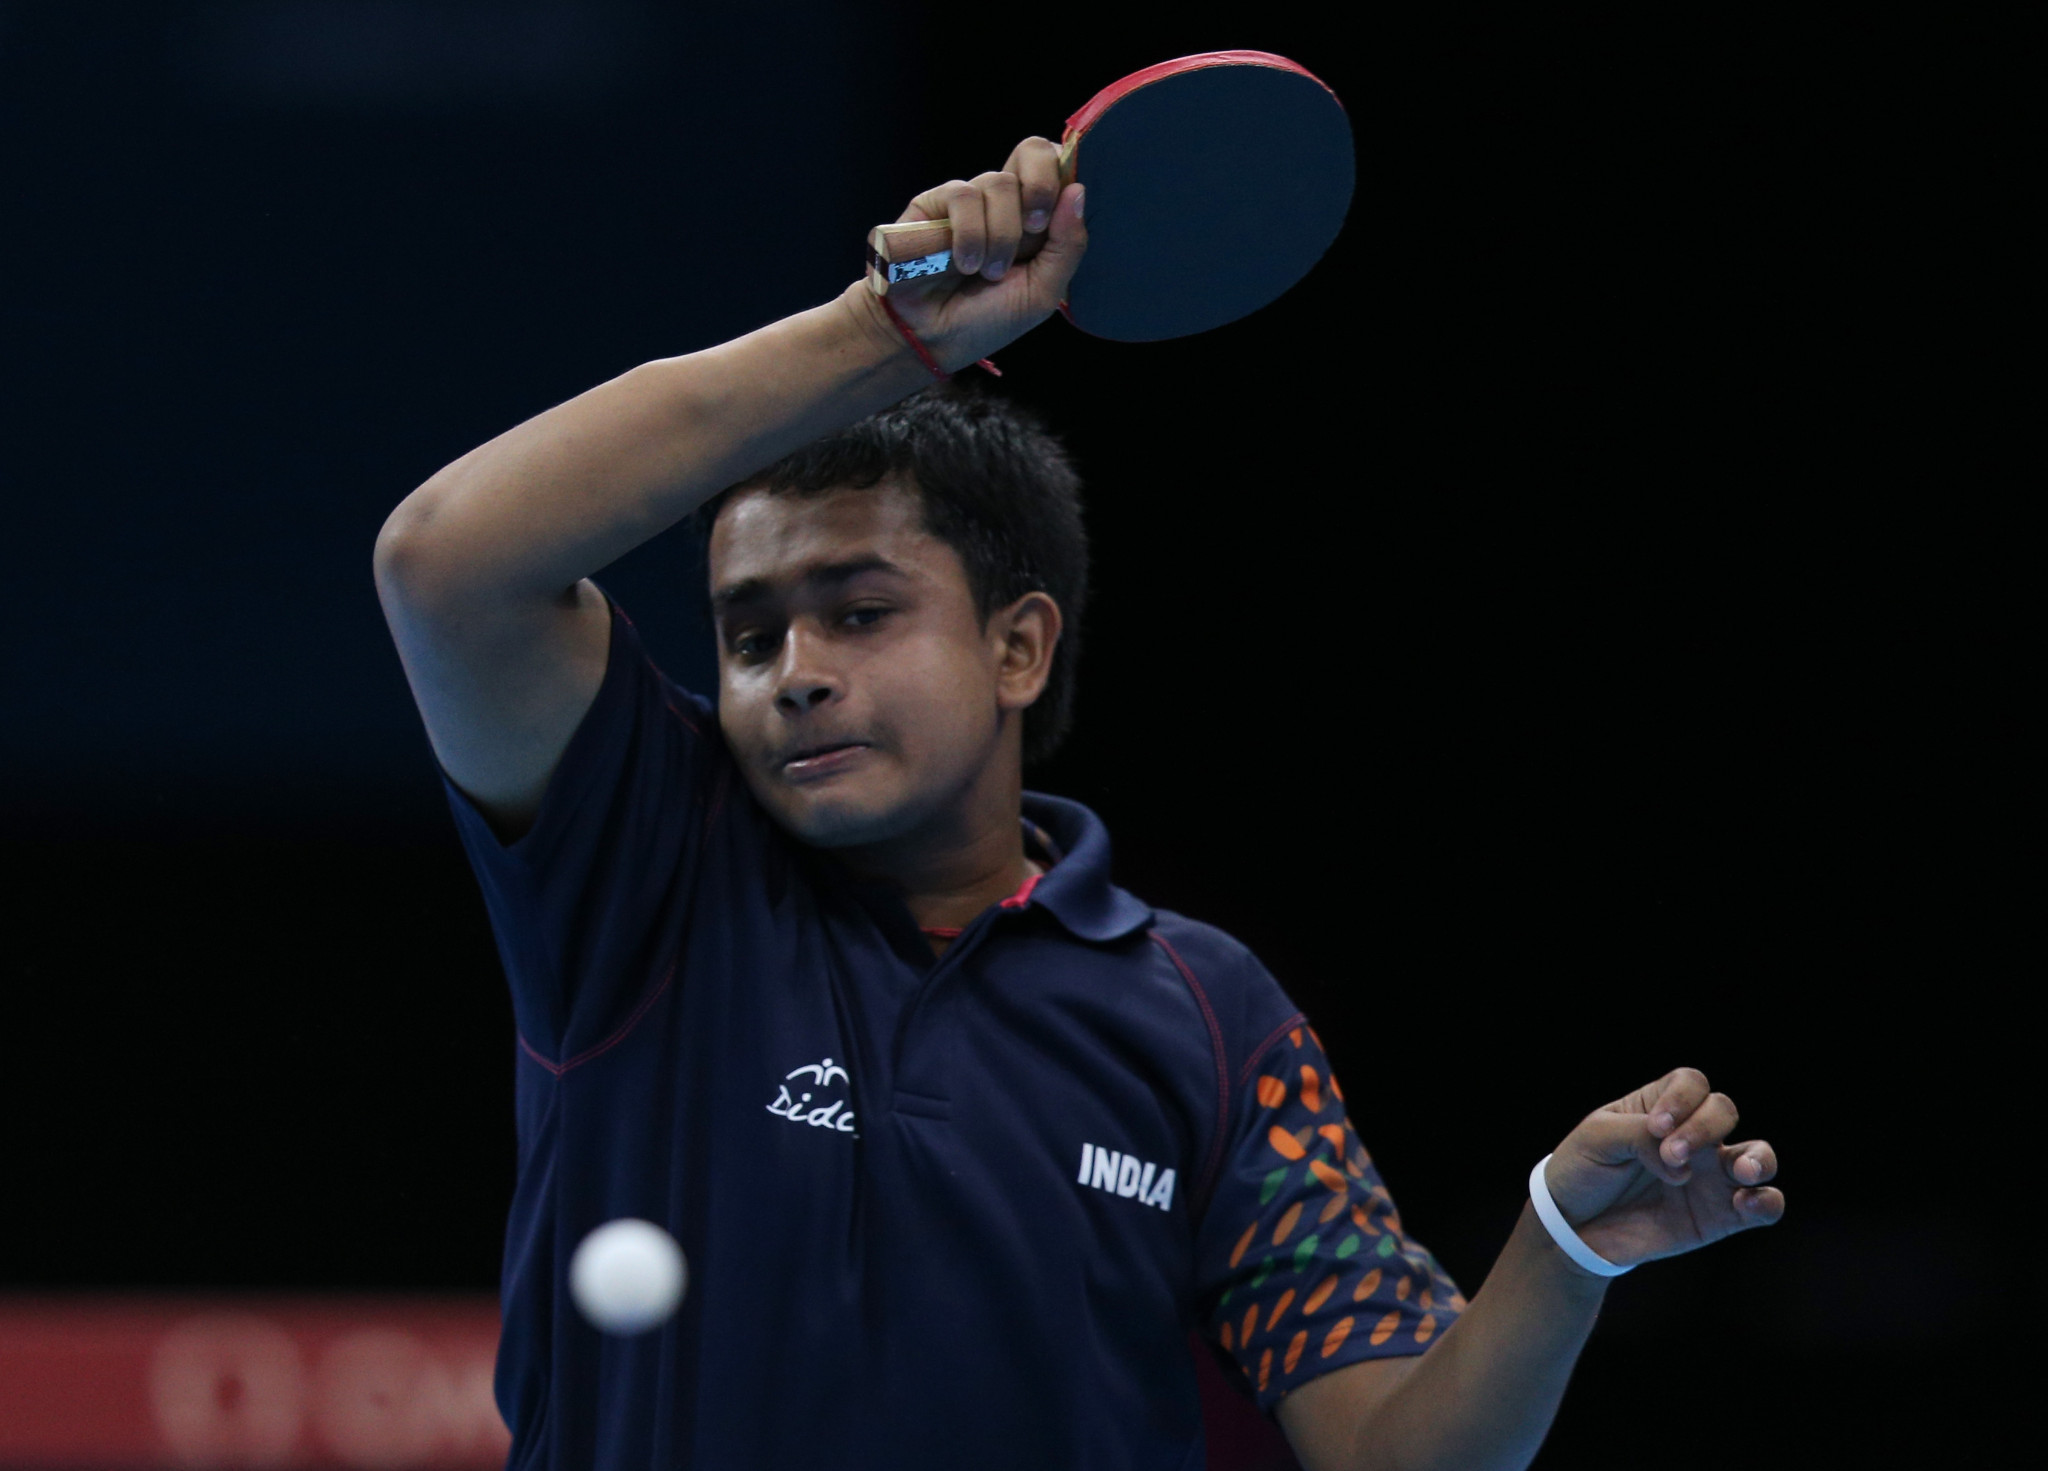 Soumyajit Ghosh playing at the London 2012 Olympic Games ©Getty Images